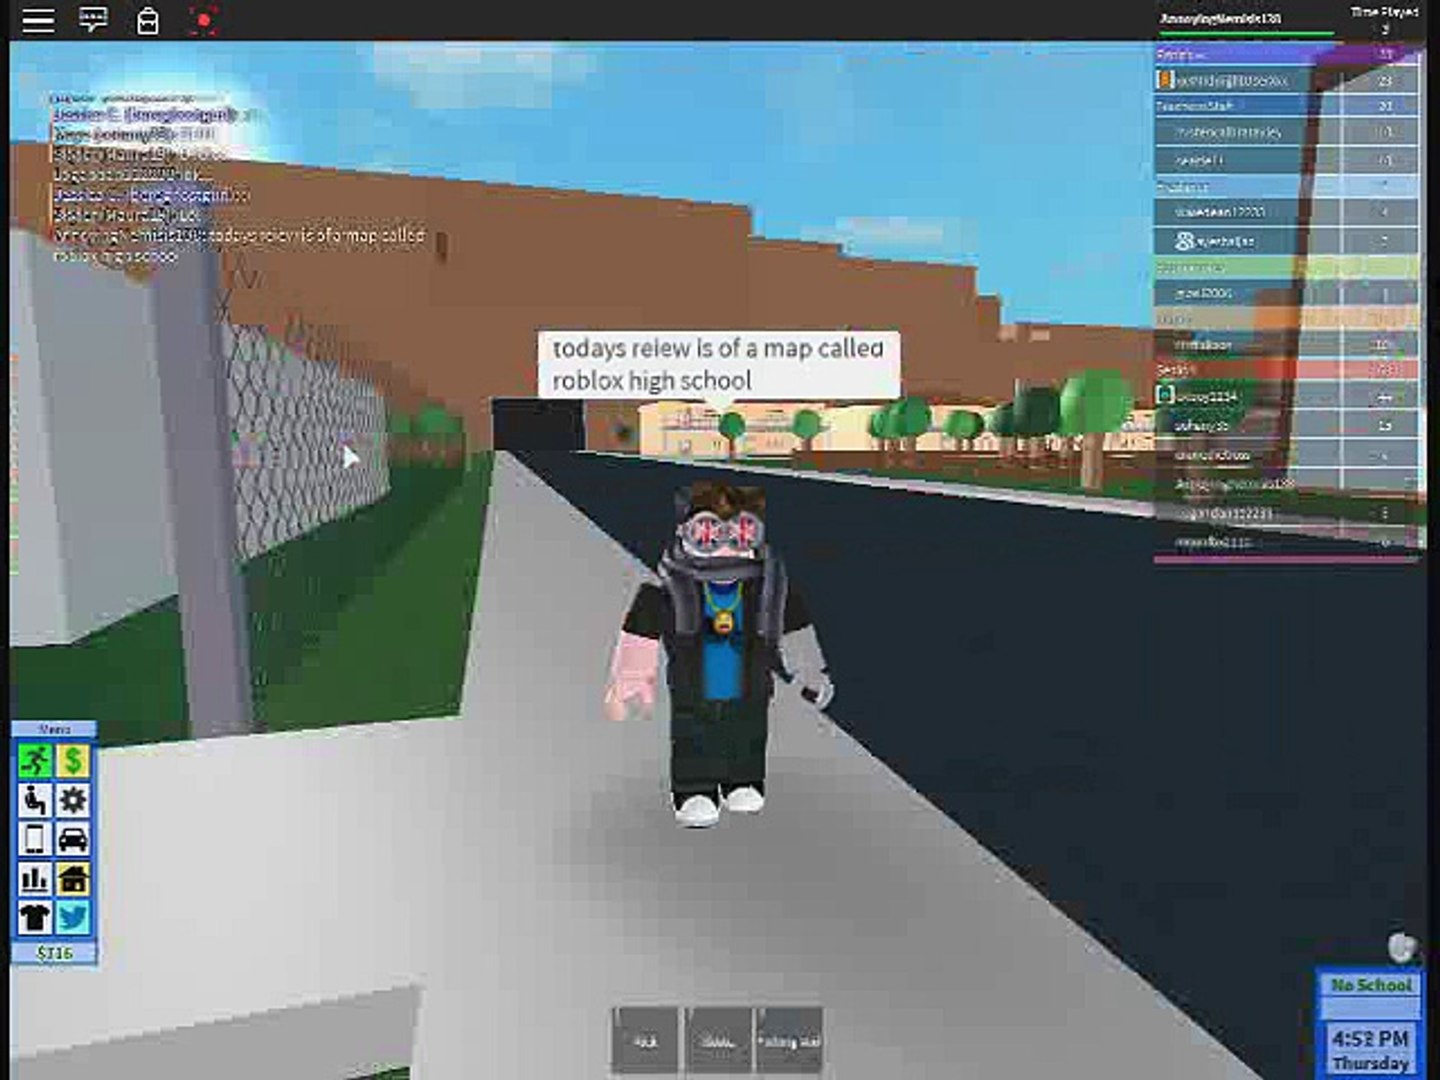 Roblox Map Review 3 Roblox High School Video Dailymotion - is roblox appropriate for school